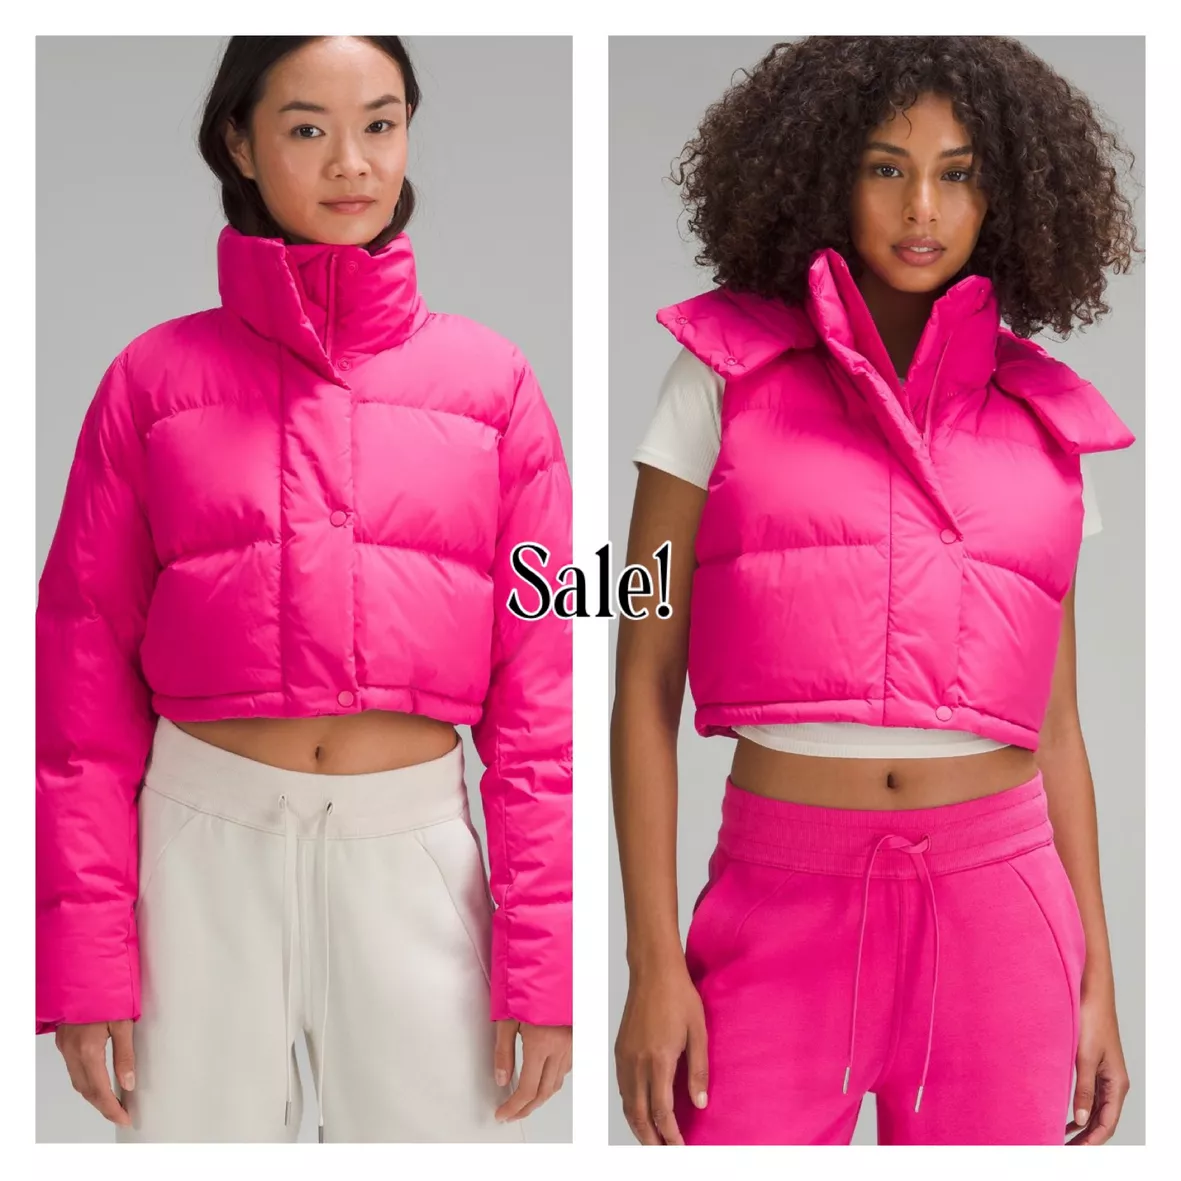 Track Wunder Puff Cropped Vest - Meadowsweet Pink - 8 at Lululemon